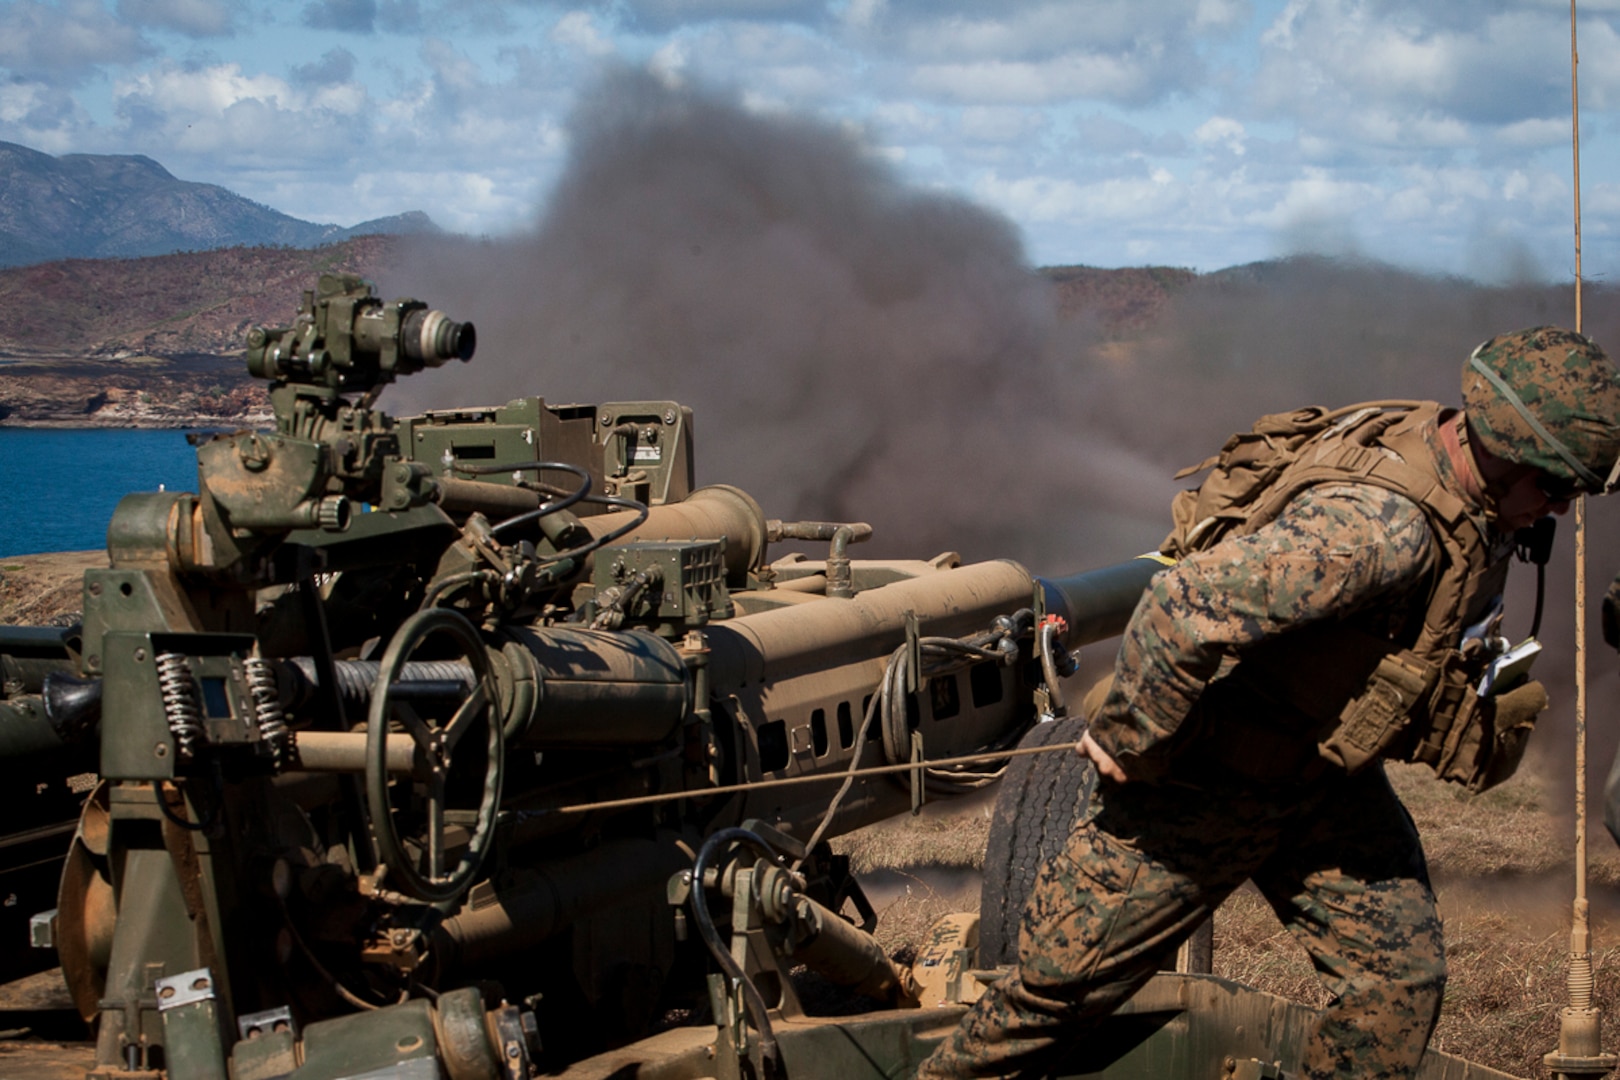 Sgt. William Fabrocini, a fire direction center chief with Weapons Company, Battalion Landing Team, 3rd Battalion, 5th Marines, pulls the lanyard on an M777A2 155 mm howitzer as part of direct-fire training during Exercise Talisman Saber 17 on Townshend Island, Shoalwater Bay Training Area, Queensland, Australia, July 17, 2017. Fabrocini, a native of Van Nuys, California, enlisted in 2009 after graduating from Van Nuys High School. BLT 3/5 is the Ground Combat Element for the 31st Marine Expeditionary Unit, and is exploring state-of-the-art concepts and technologies as the dedicated force for Sea Dragon 2025, a Marine Corps initiative to prepare for future battles. Talisman Saber is a biennial exercise designed to improve the interoperability between Australian and U.S. forces. The 31st MEU is taking part in Talisman Saber 17 while deployed on a regularly-scheduled patrol of the Indo-Asia-Pacific region. (U.S. Marine Corps photo by Lance Cpl. Stormy Mendez/Released)